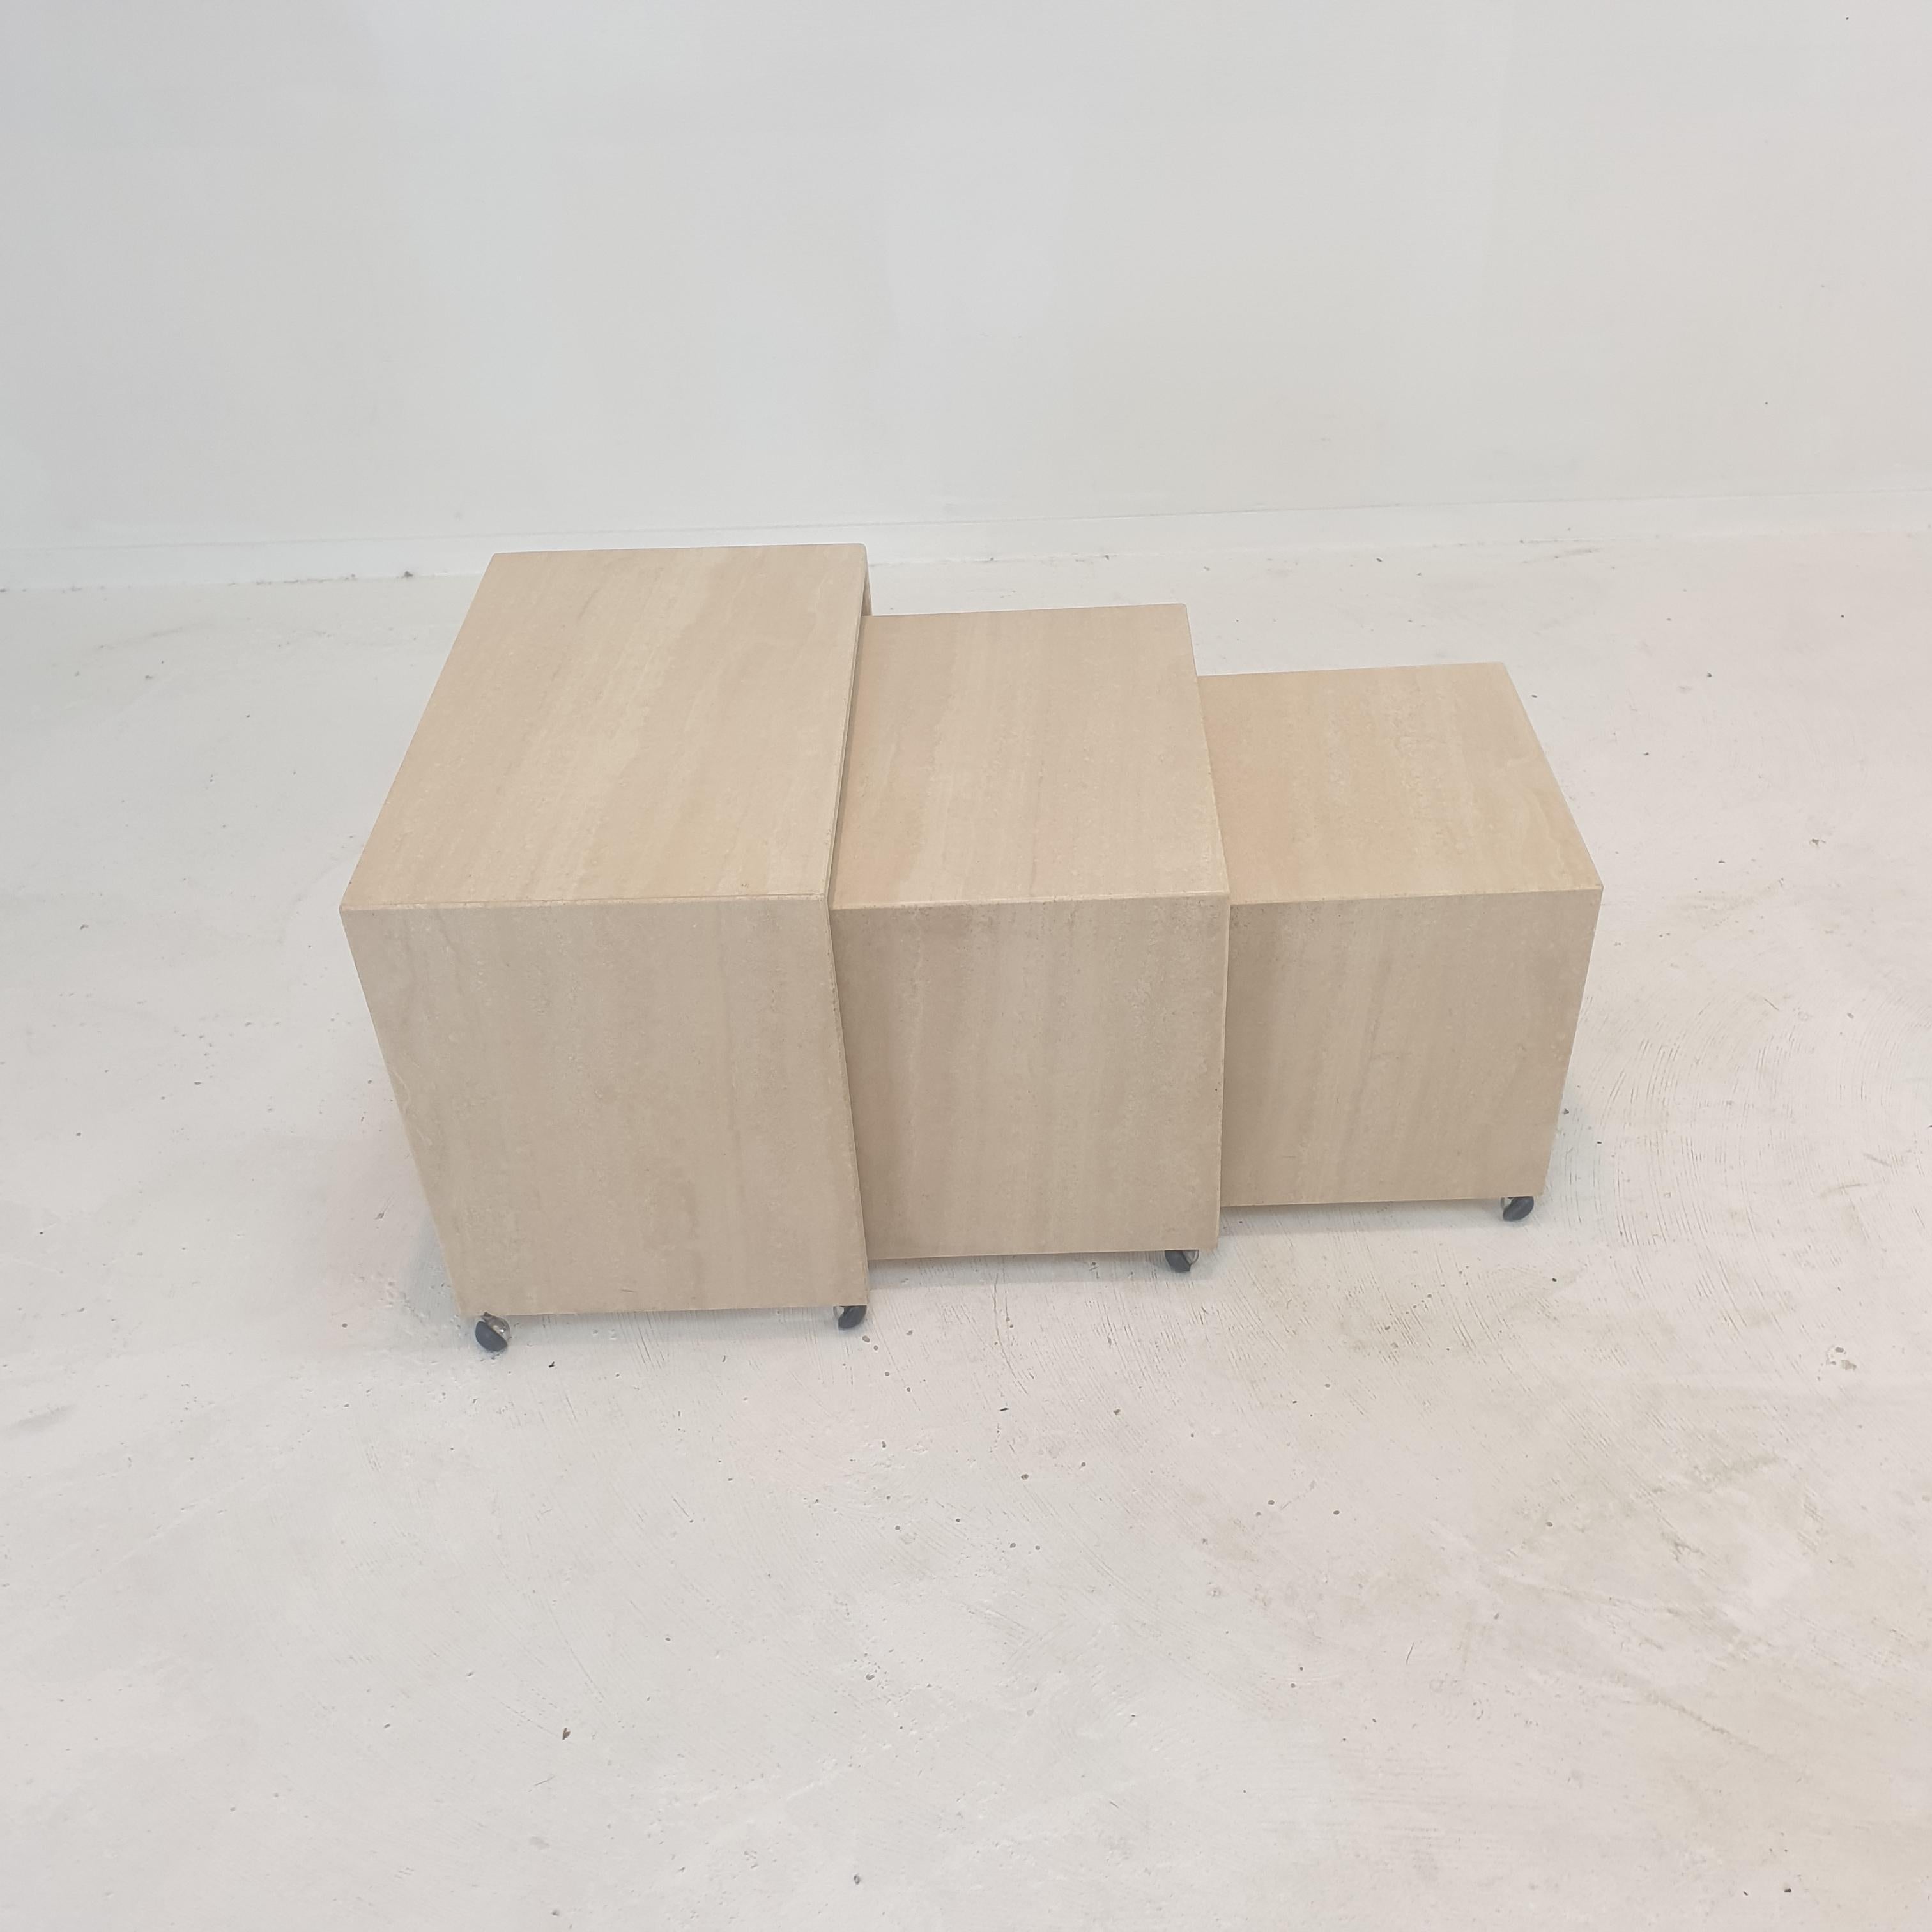 Hand-Crafted Set of 3 Italian Travertine Nesting Tables, 1980s For Sale